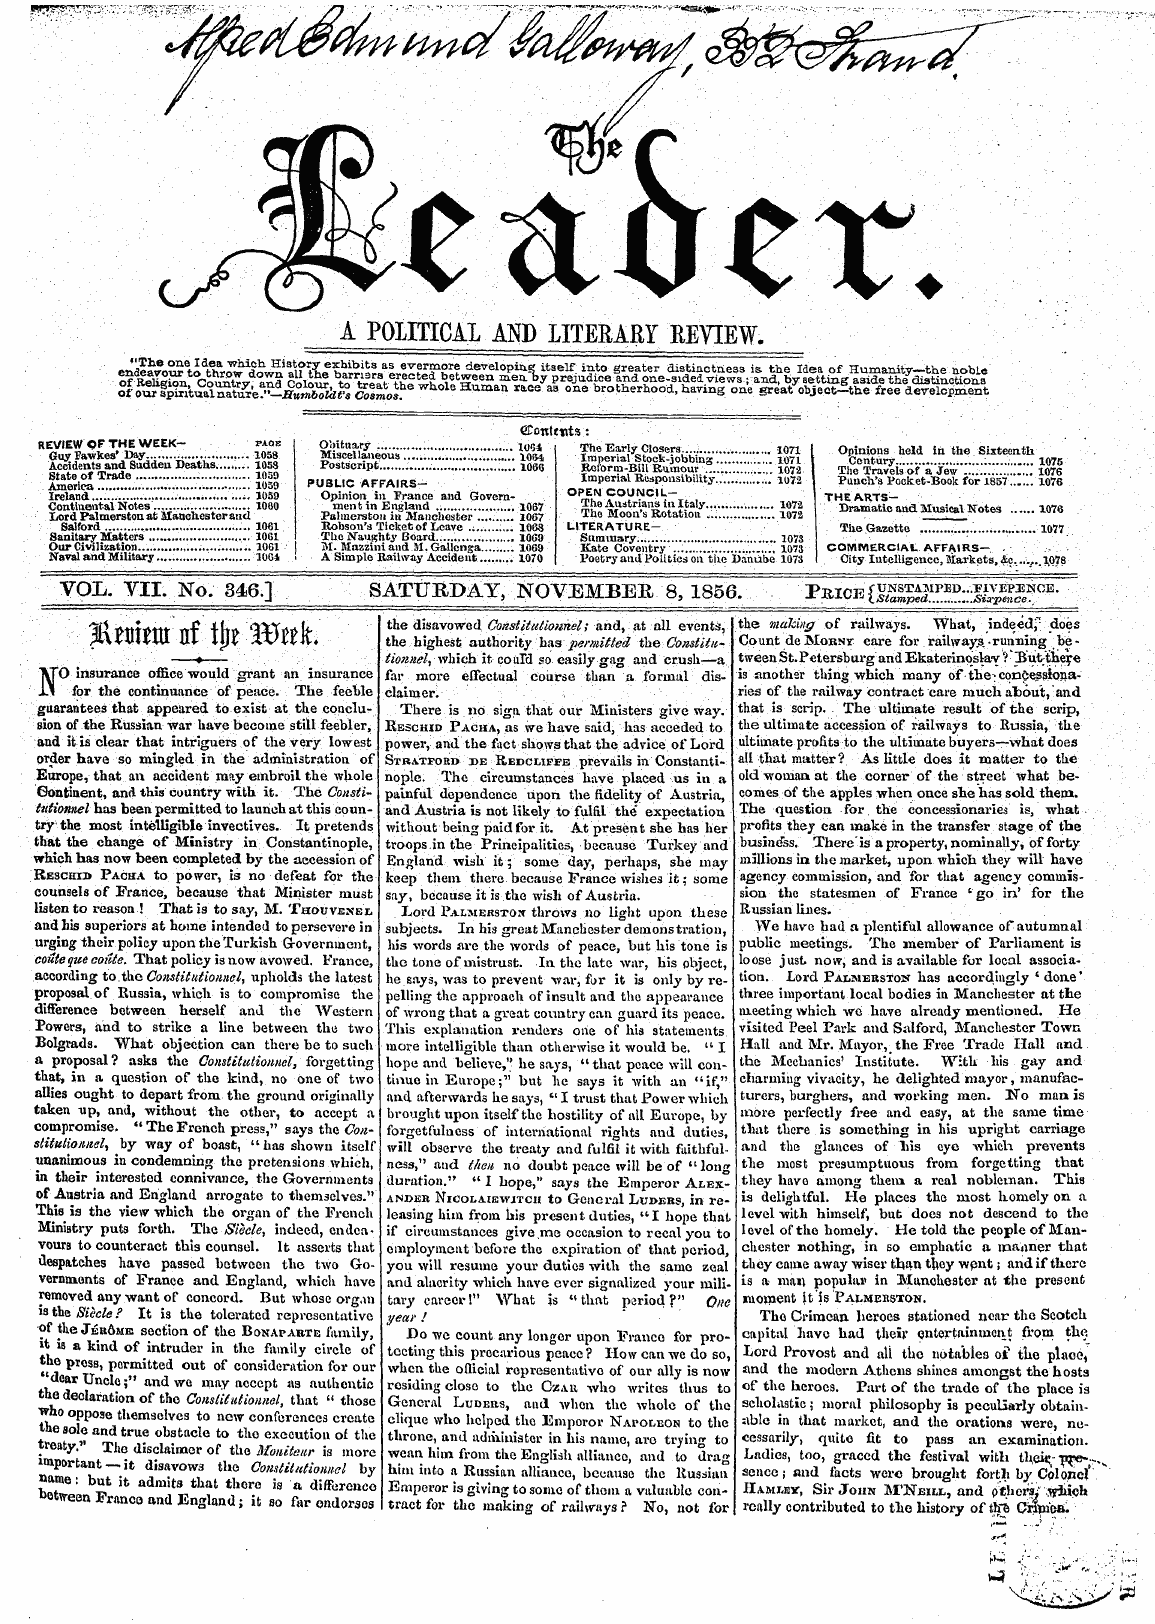 Leader (1850-1860): jS F Y, 2nd edition - ; ¦ '¦' . ' . '" ¦ ¦ ¦ . ¦:; . ¦¦ . ¦ .. ¦ ¦" . - ©Ontttits:: . " ; . ' . \- ' ¦ '' : . ' . . . ¦ ¦ ¦¦ . ¦¦¦ . ¦ -. .. ' ' .. .. ; ¦ . ?He Earl 1071 In The